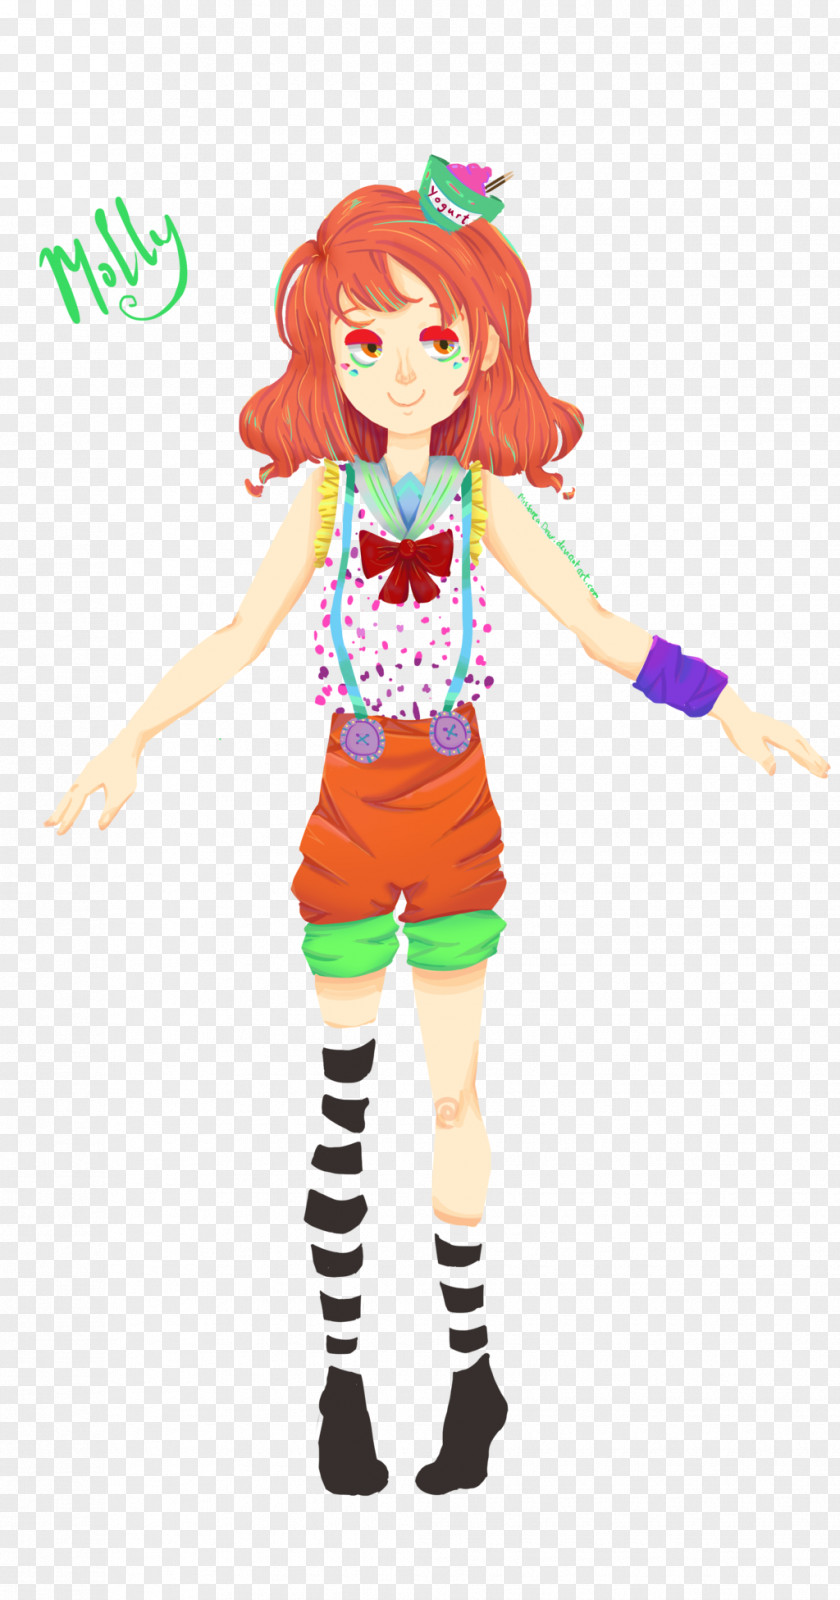 Doll Character Figurine Clip Art PNG